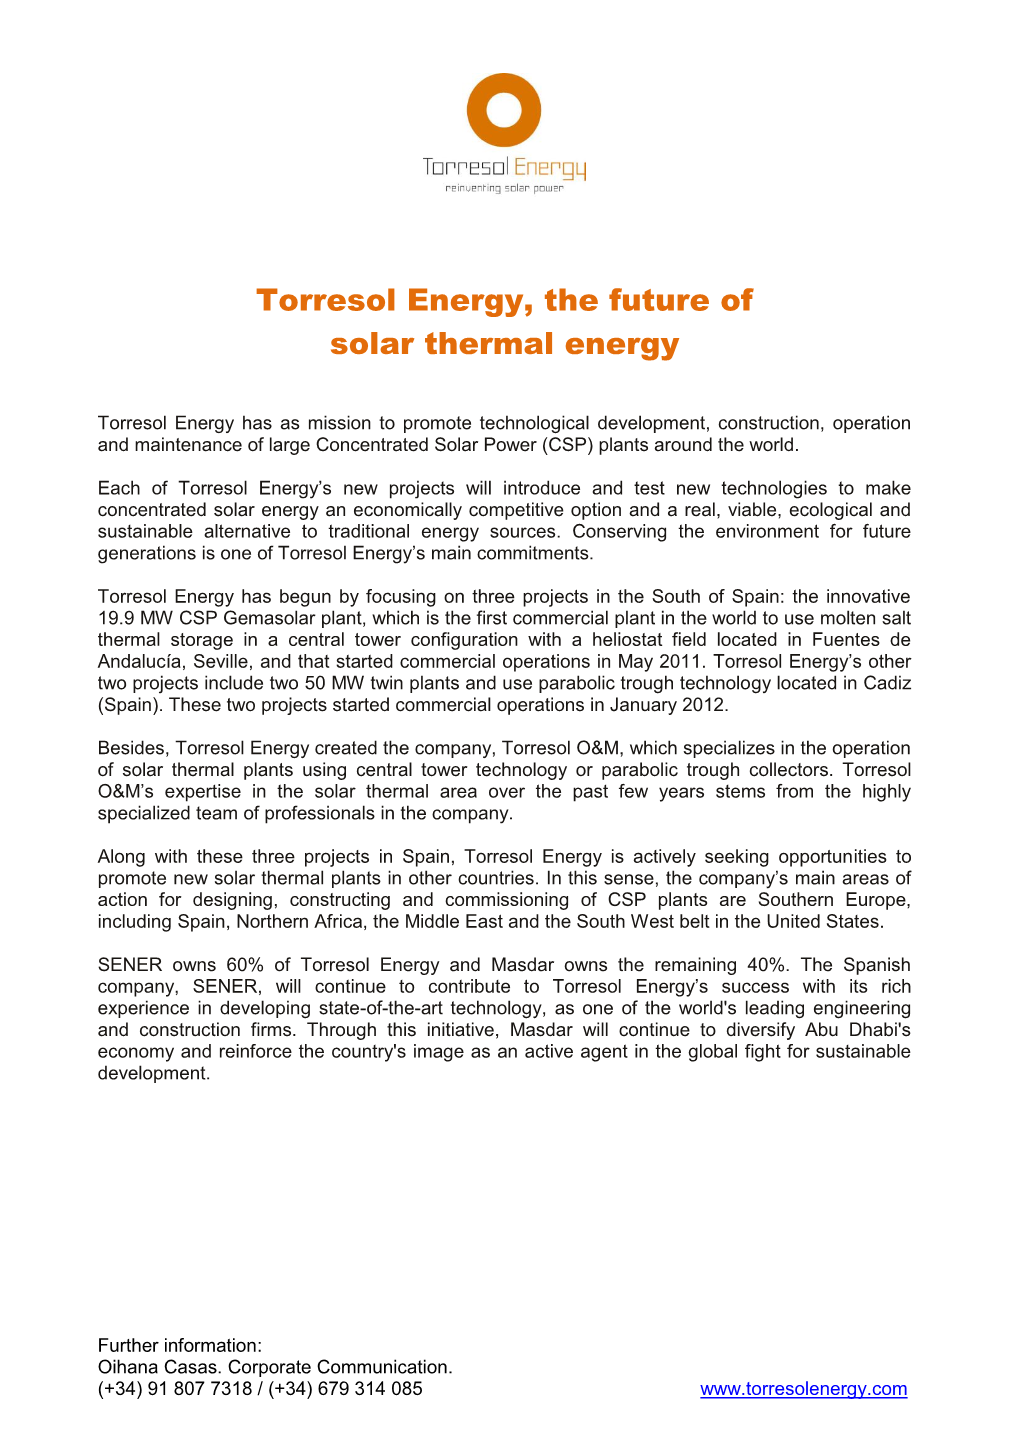 Torresol Energy, the Future of Solar Thermal Energy